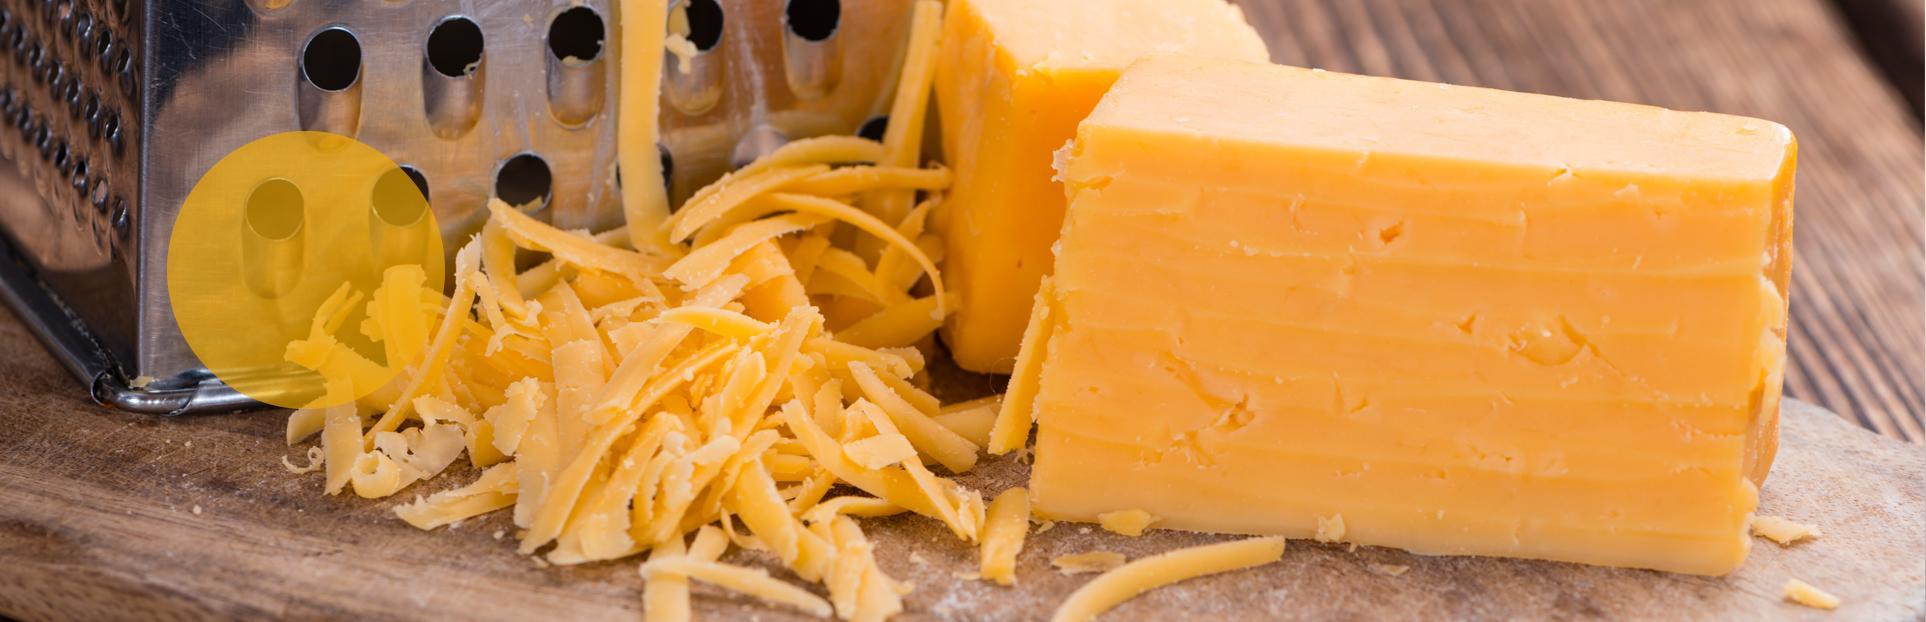 grated cheddar cheese and block of cheese